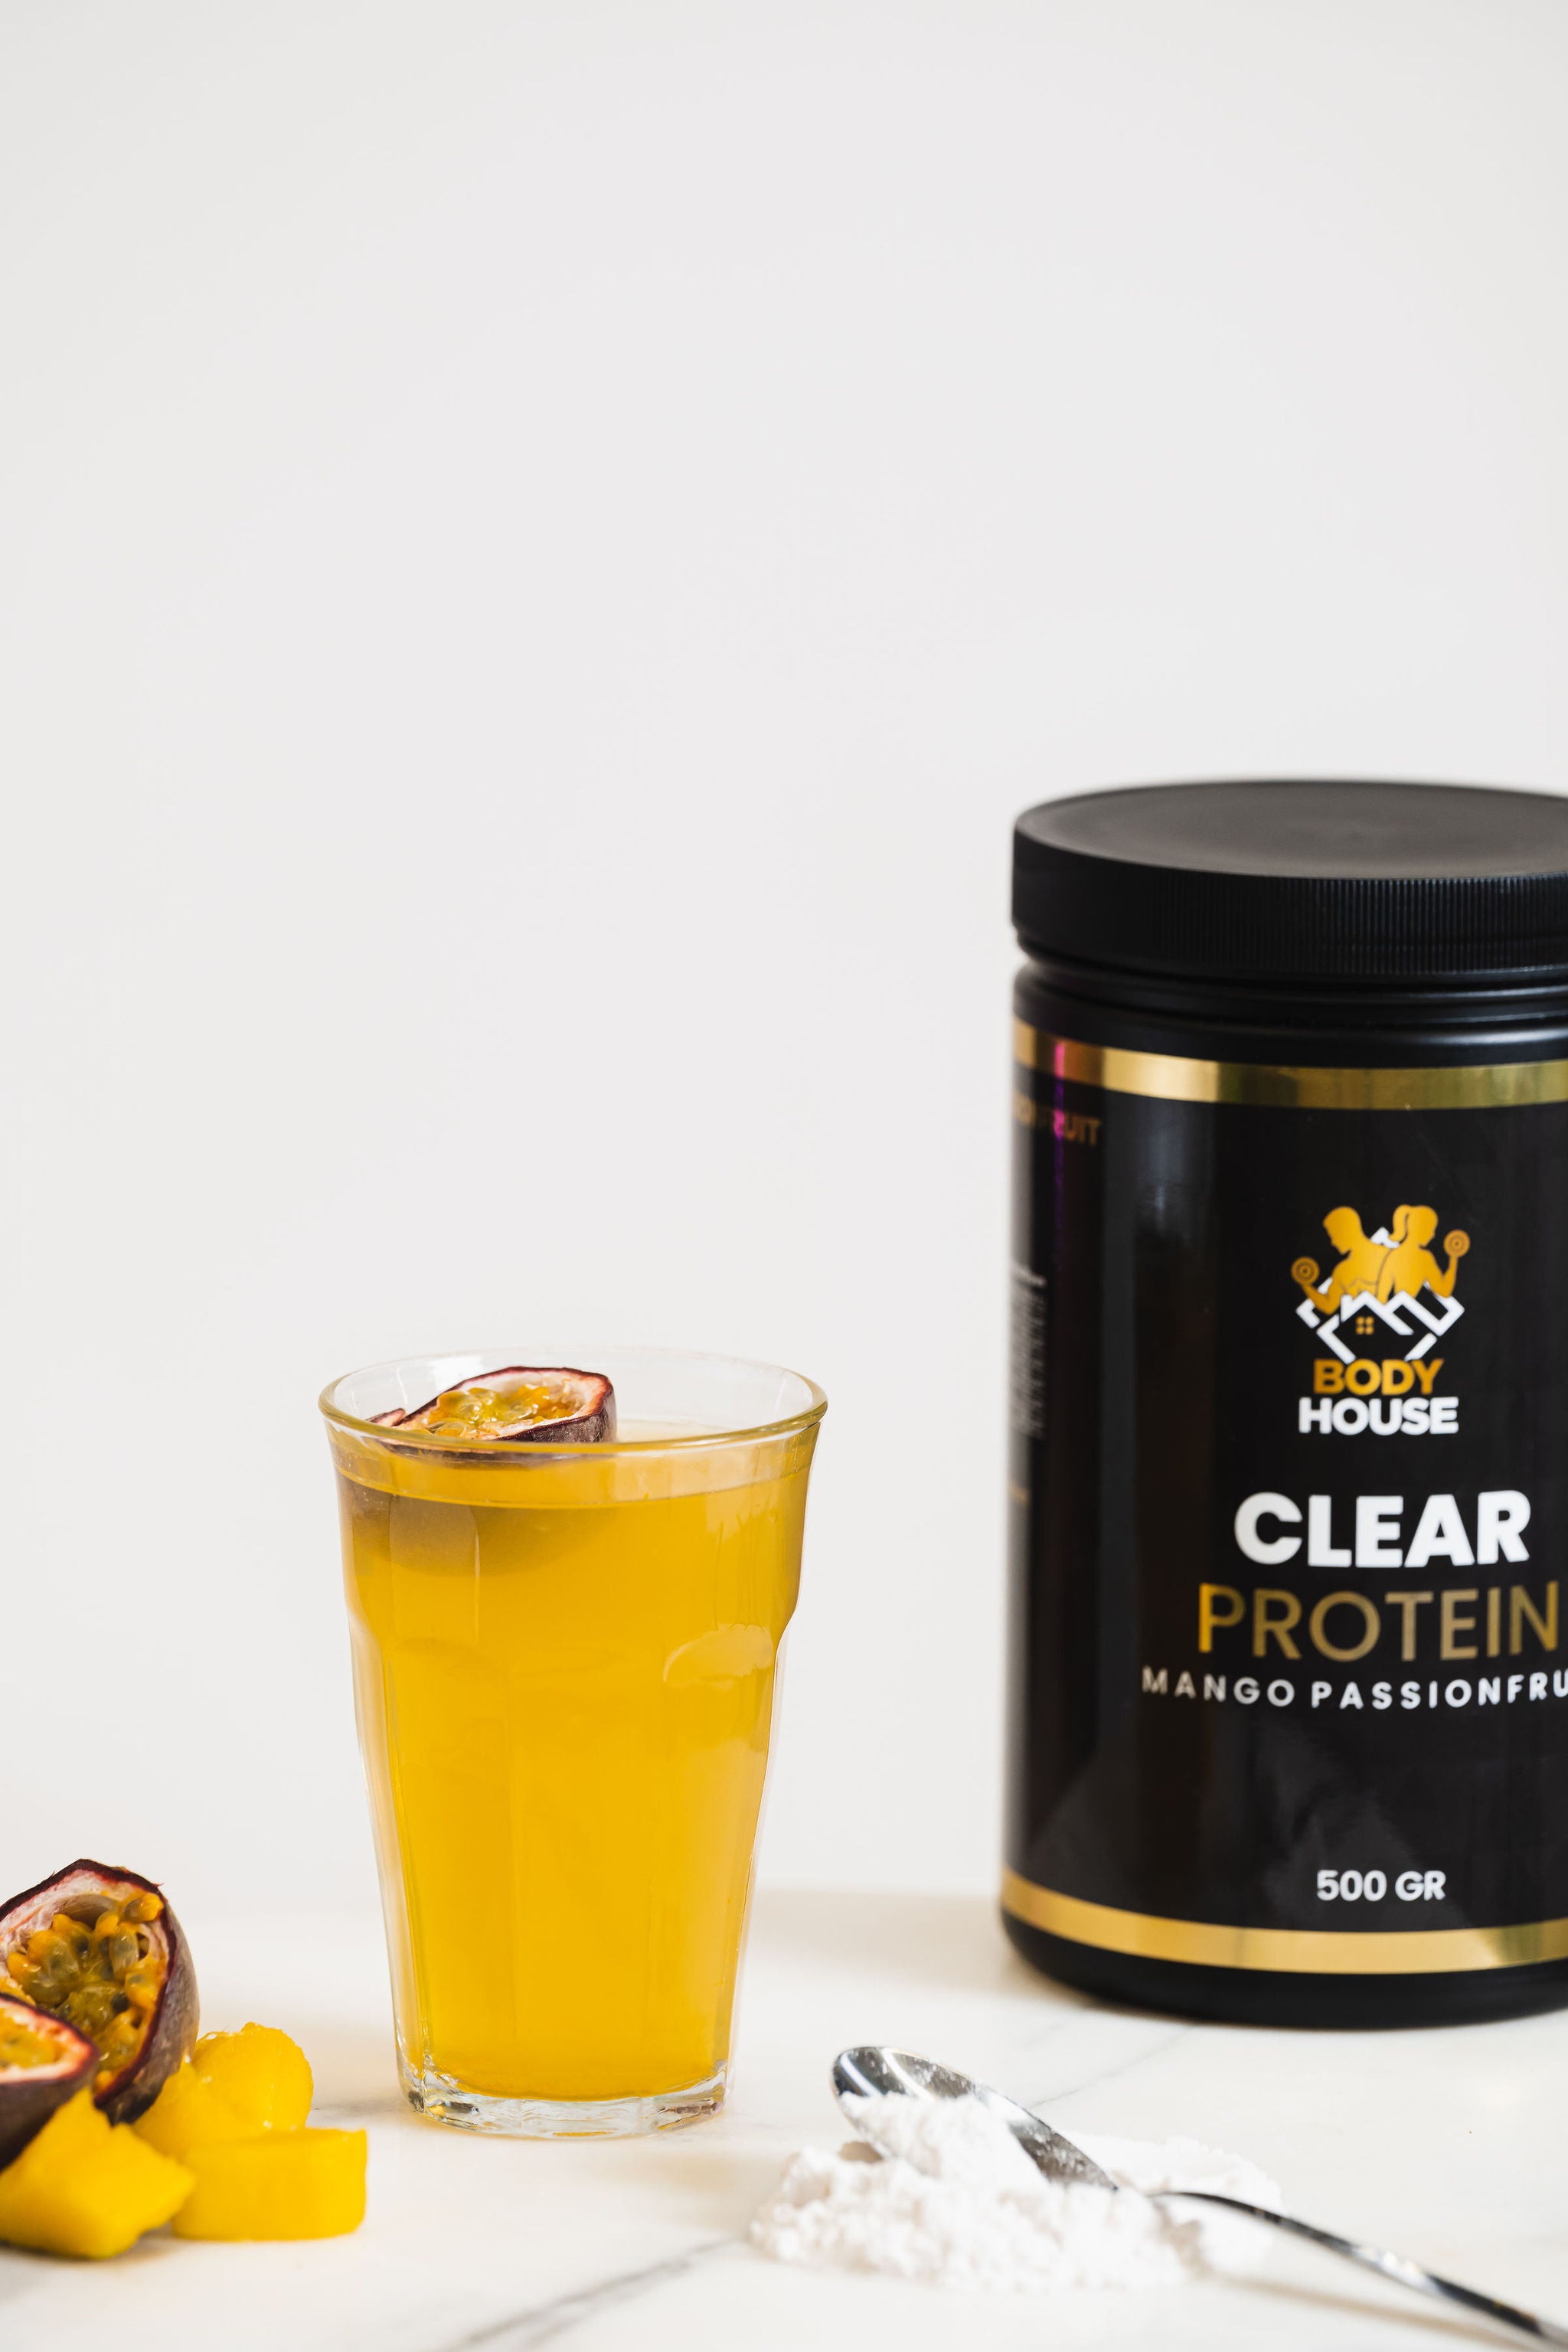 Verfrissende Clear Whey Protein Mango Passionfruit www.bodyhouse.nl